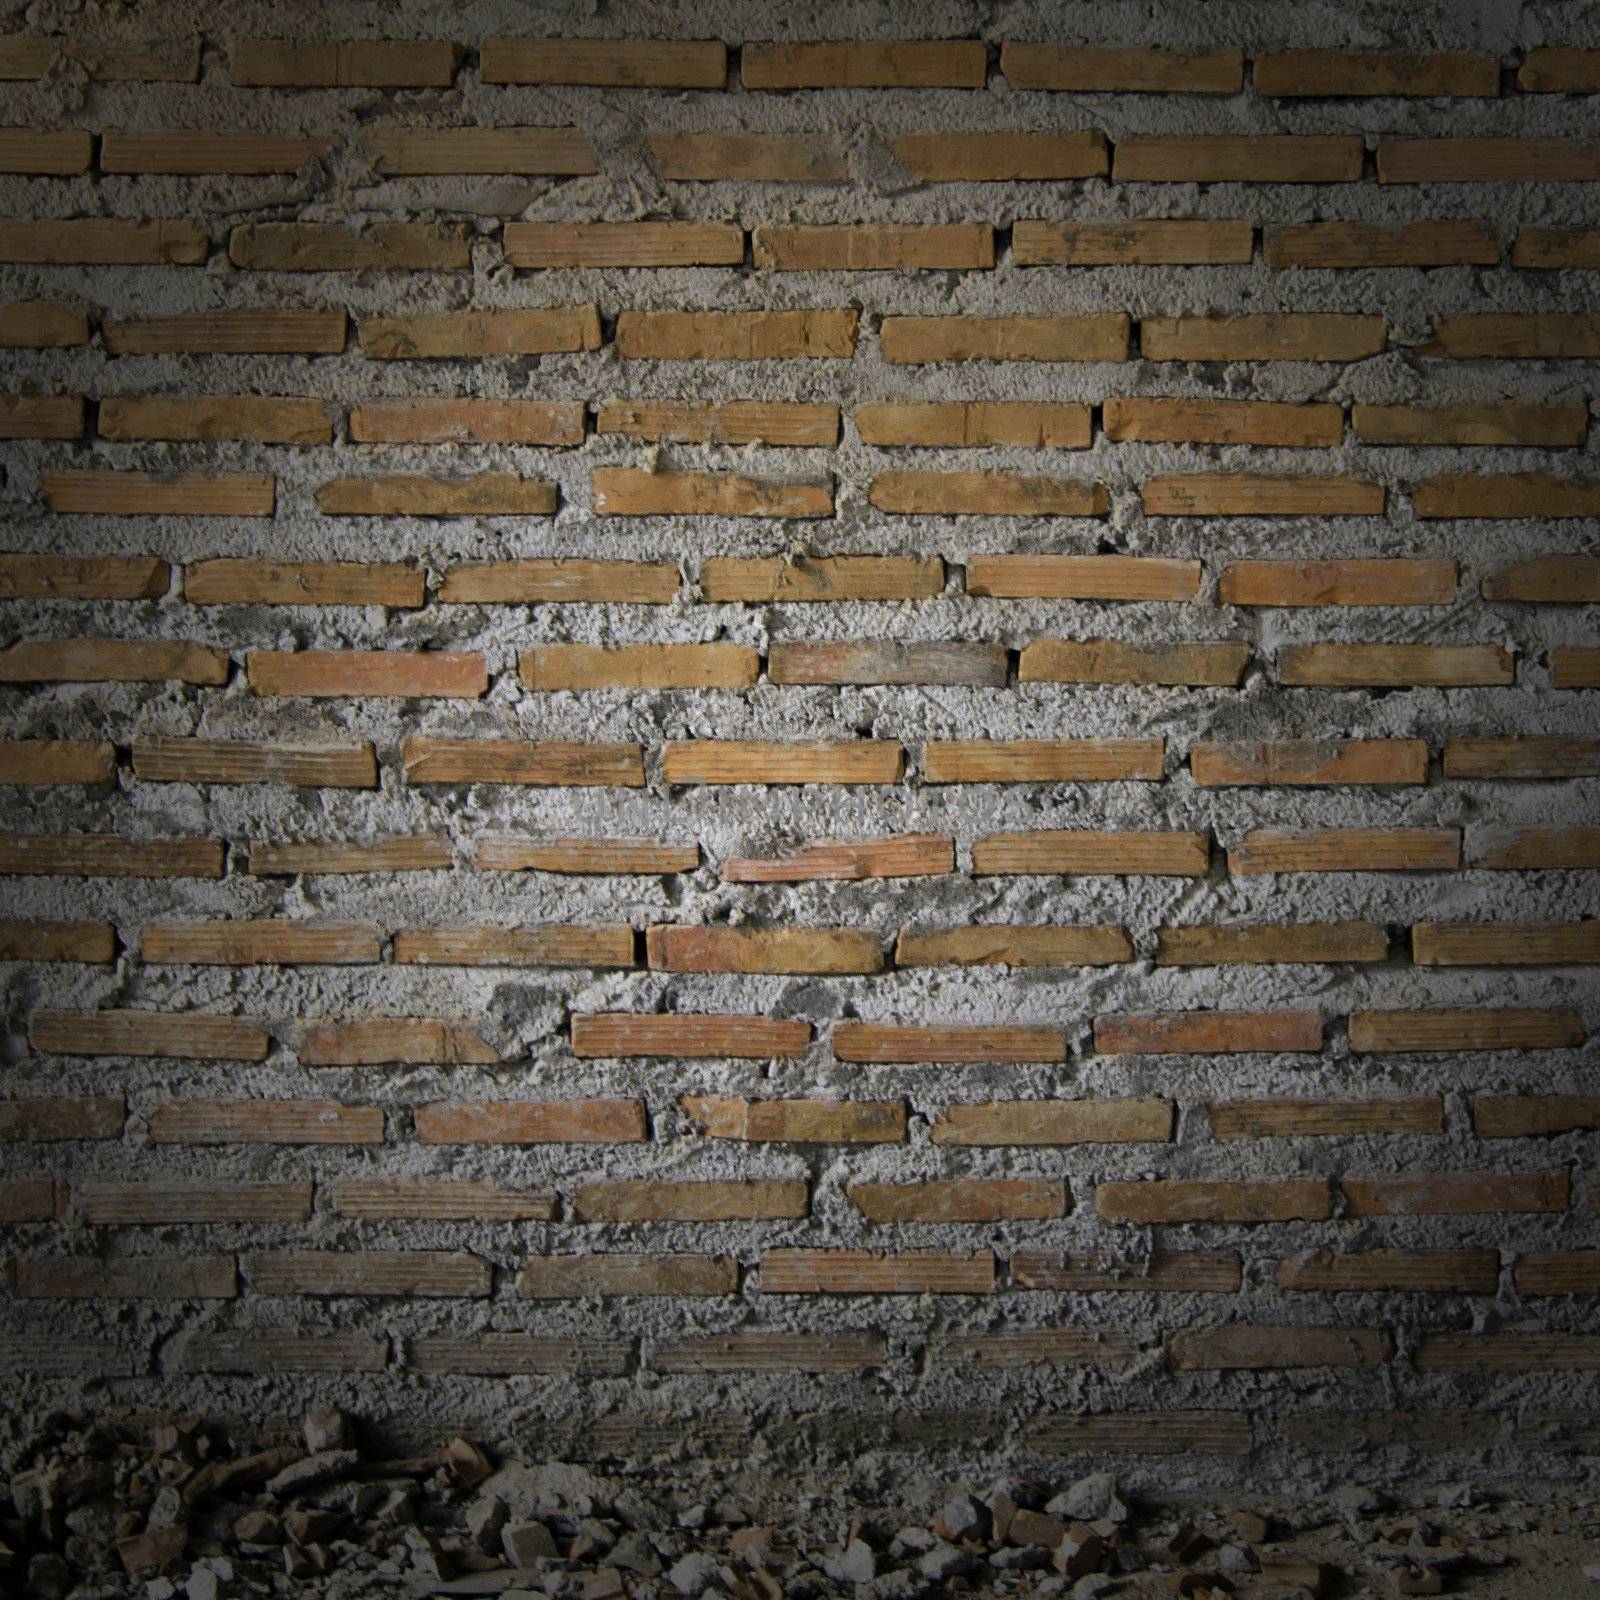 The Background of the Pattern of the Brick Wall by siraanamwong